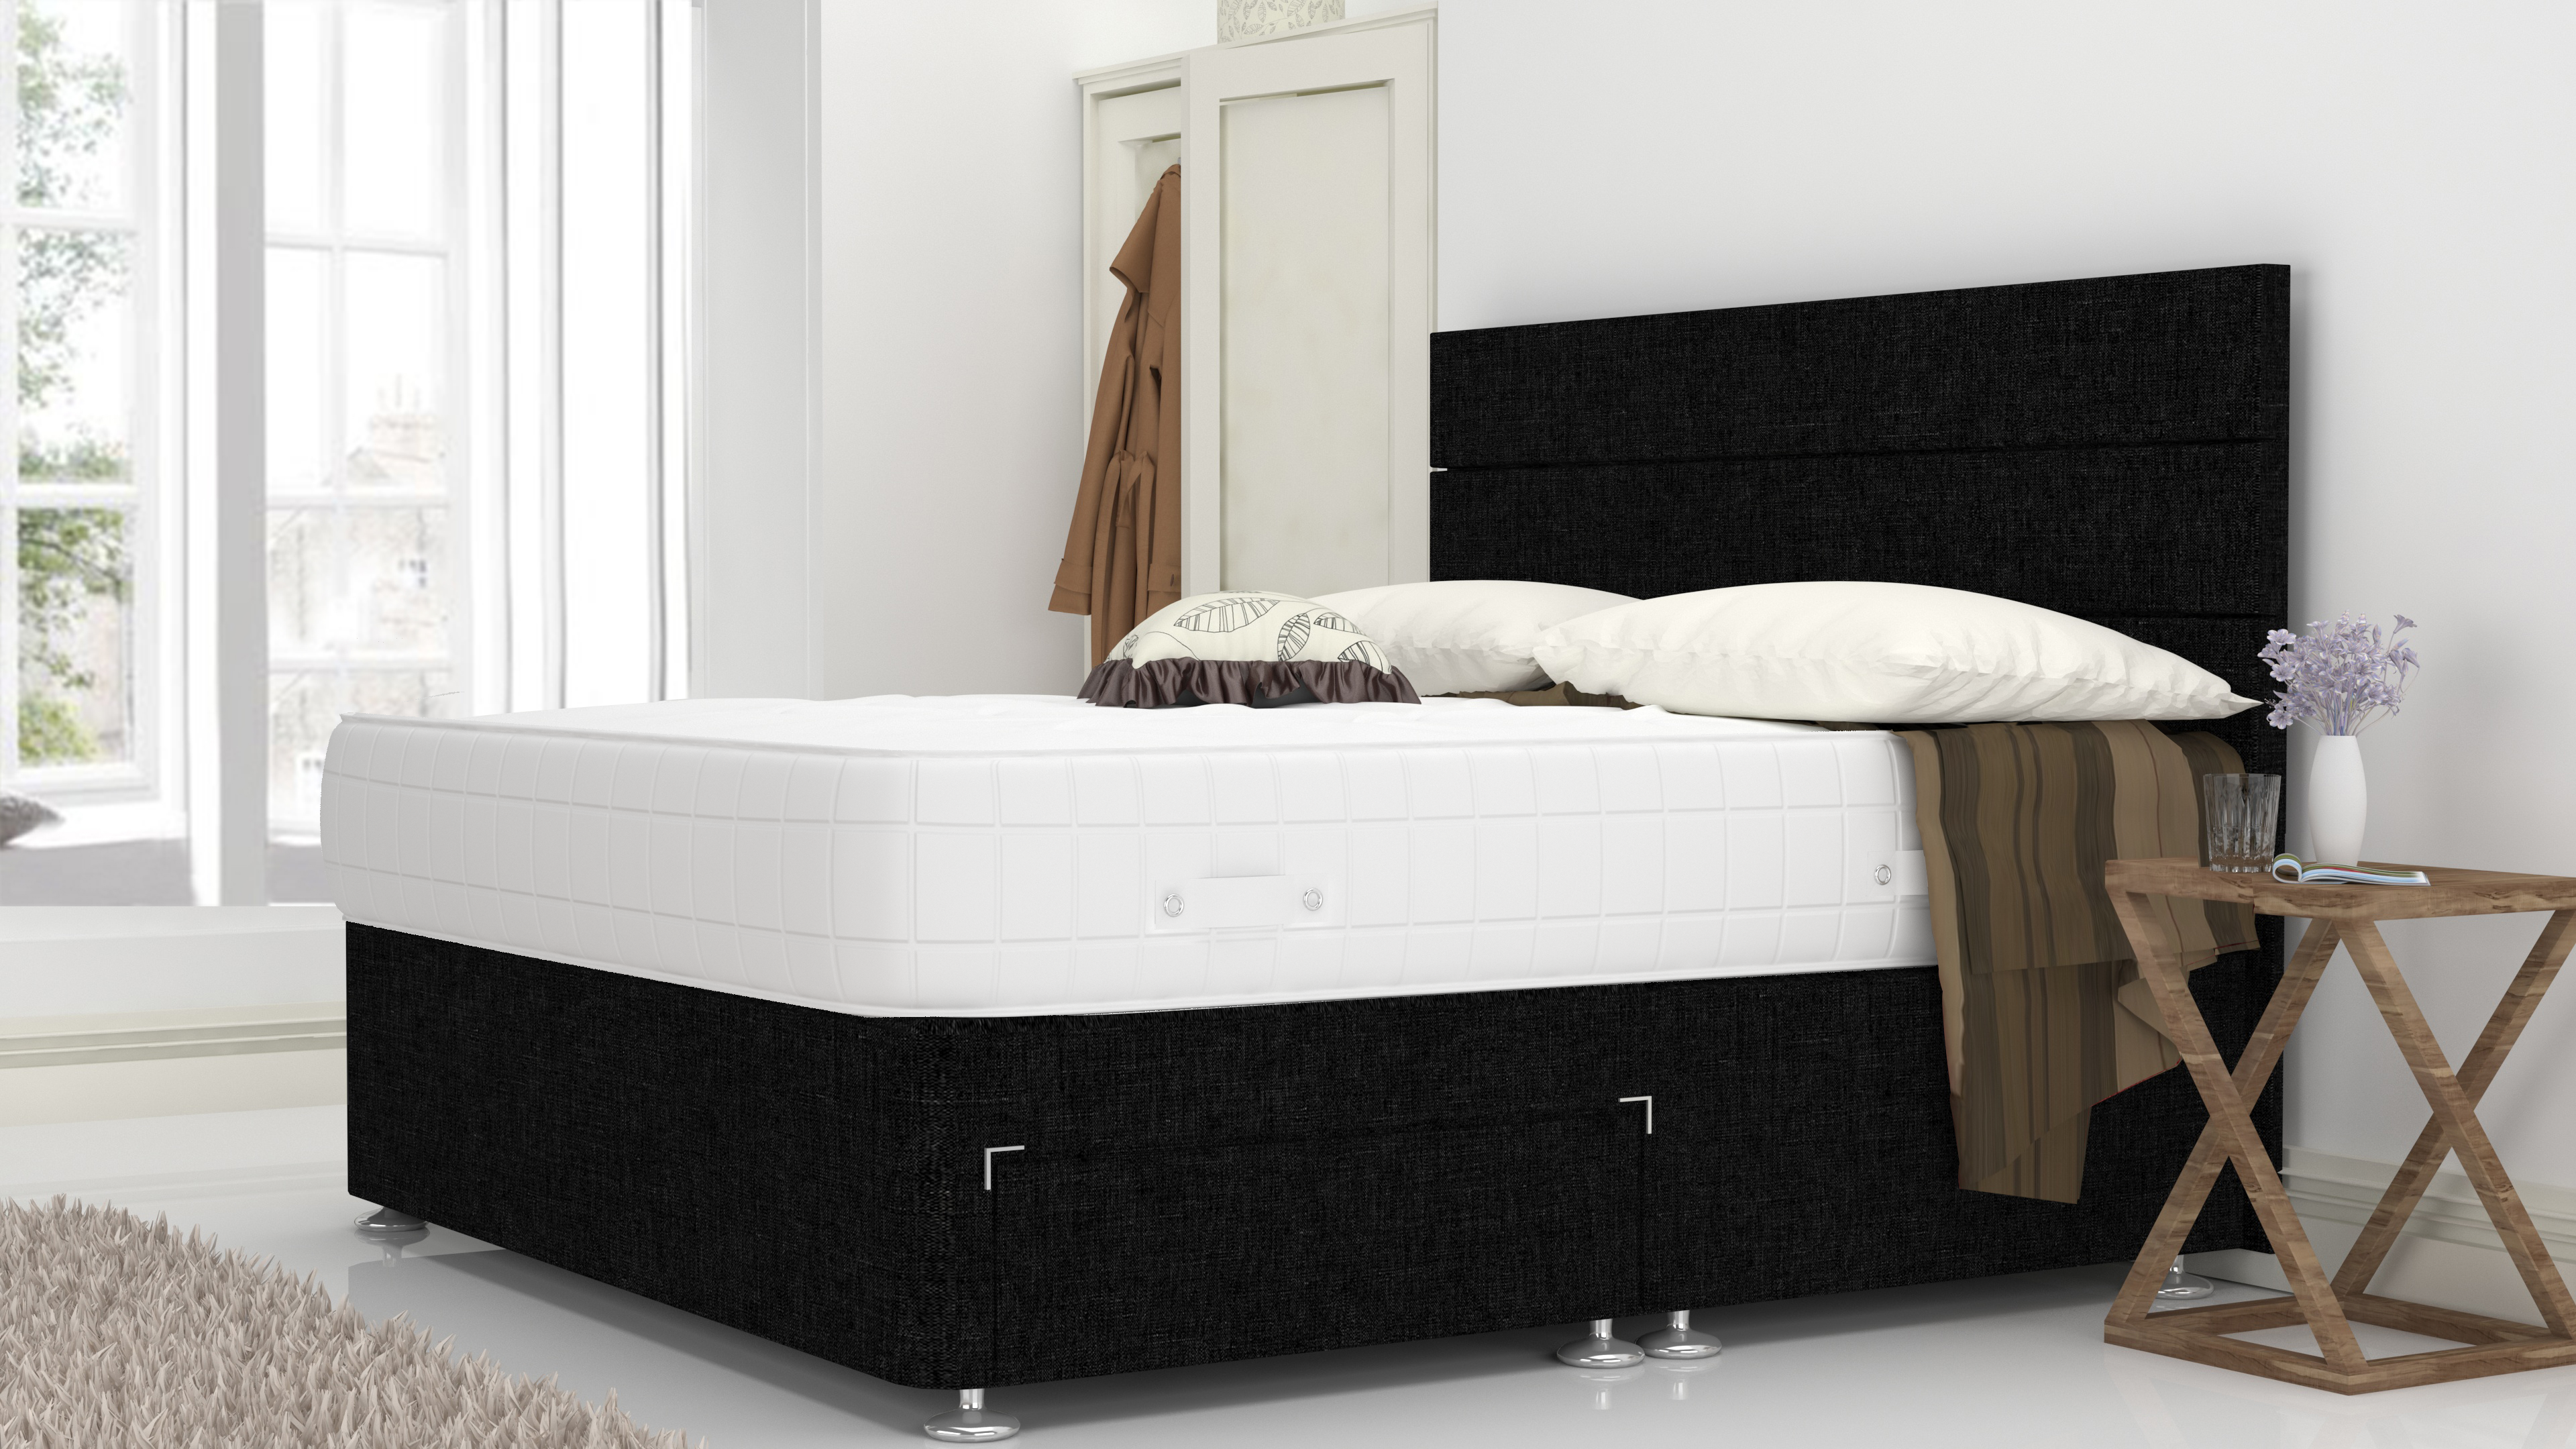 Black Venice 4 Feet Divan Bed Set With 3 Panel Headboard (Included Feet) And Free Pocket Sprung Mattress